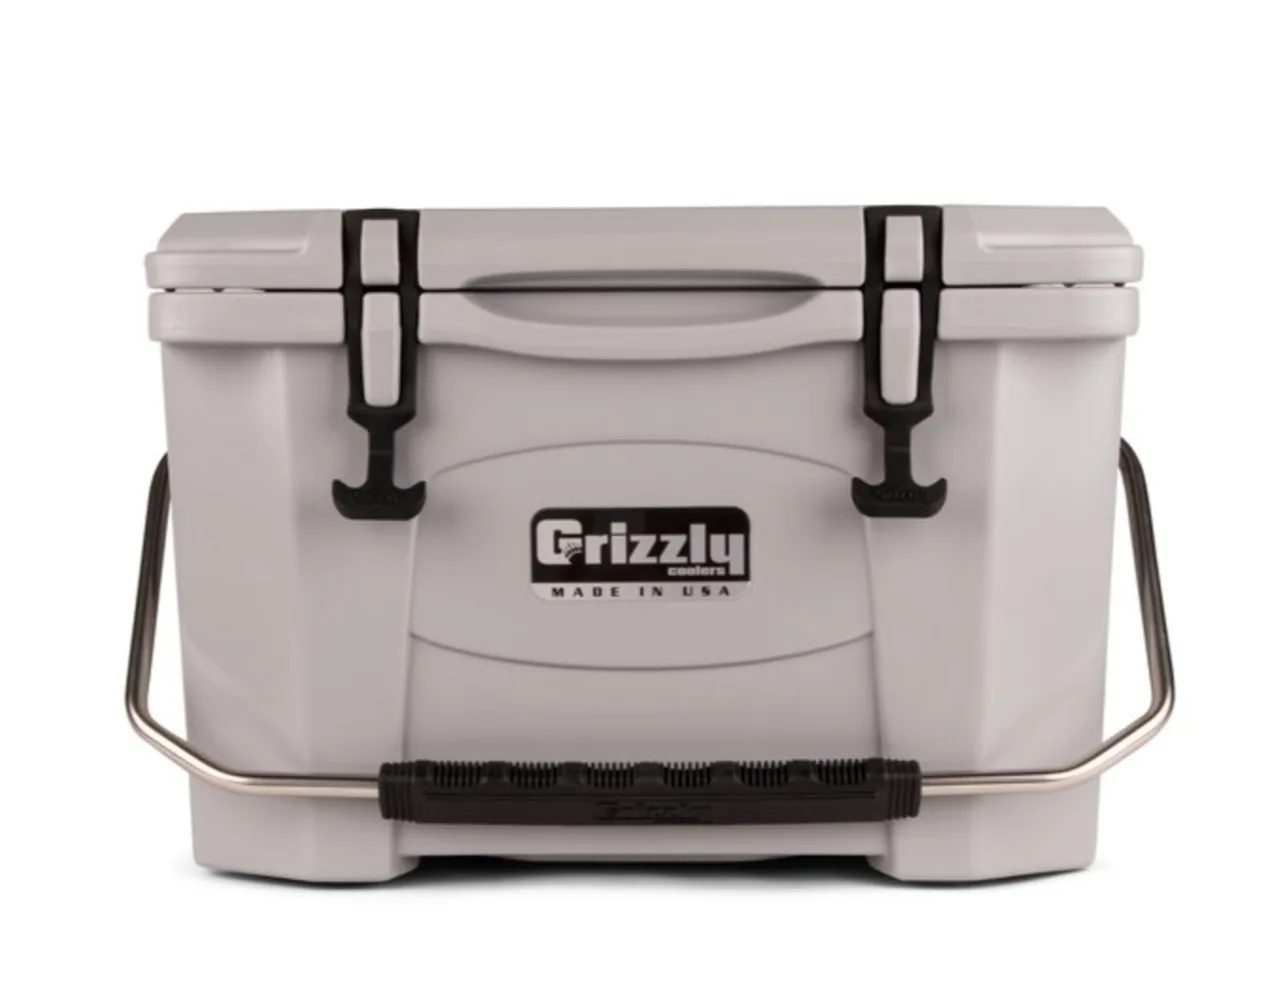 Best YETI Cooler Alternatives That Are Way Cheaper